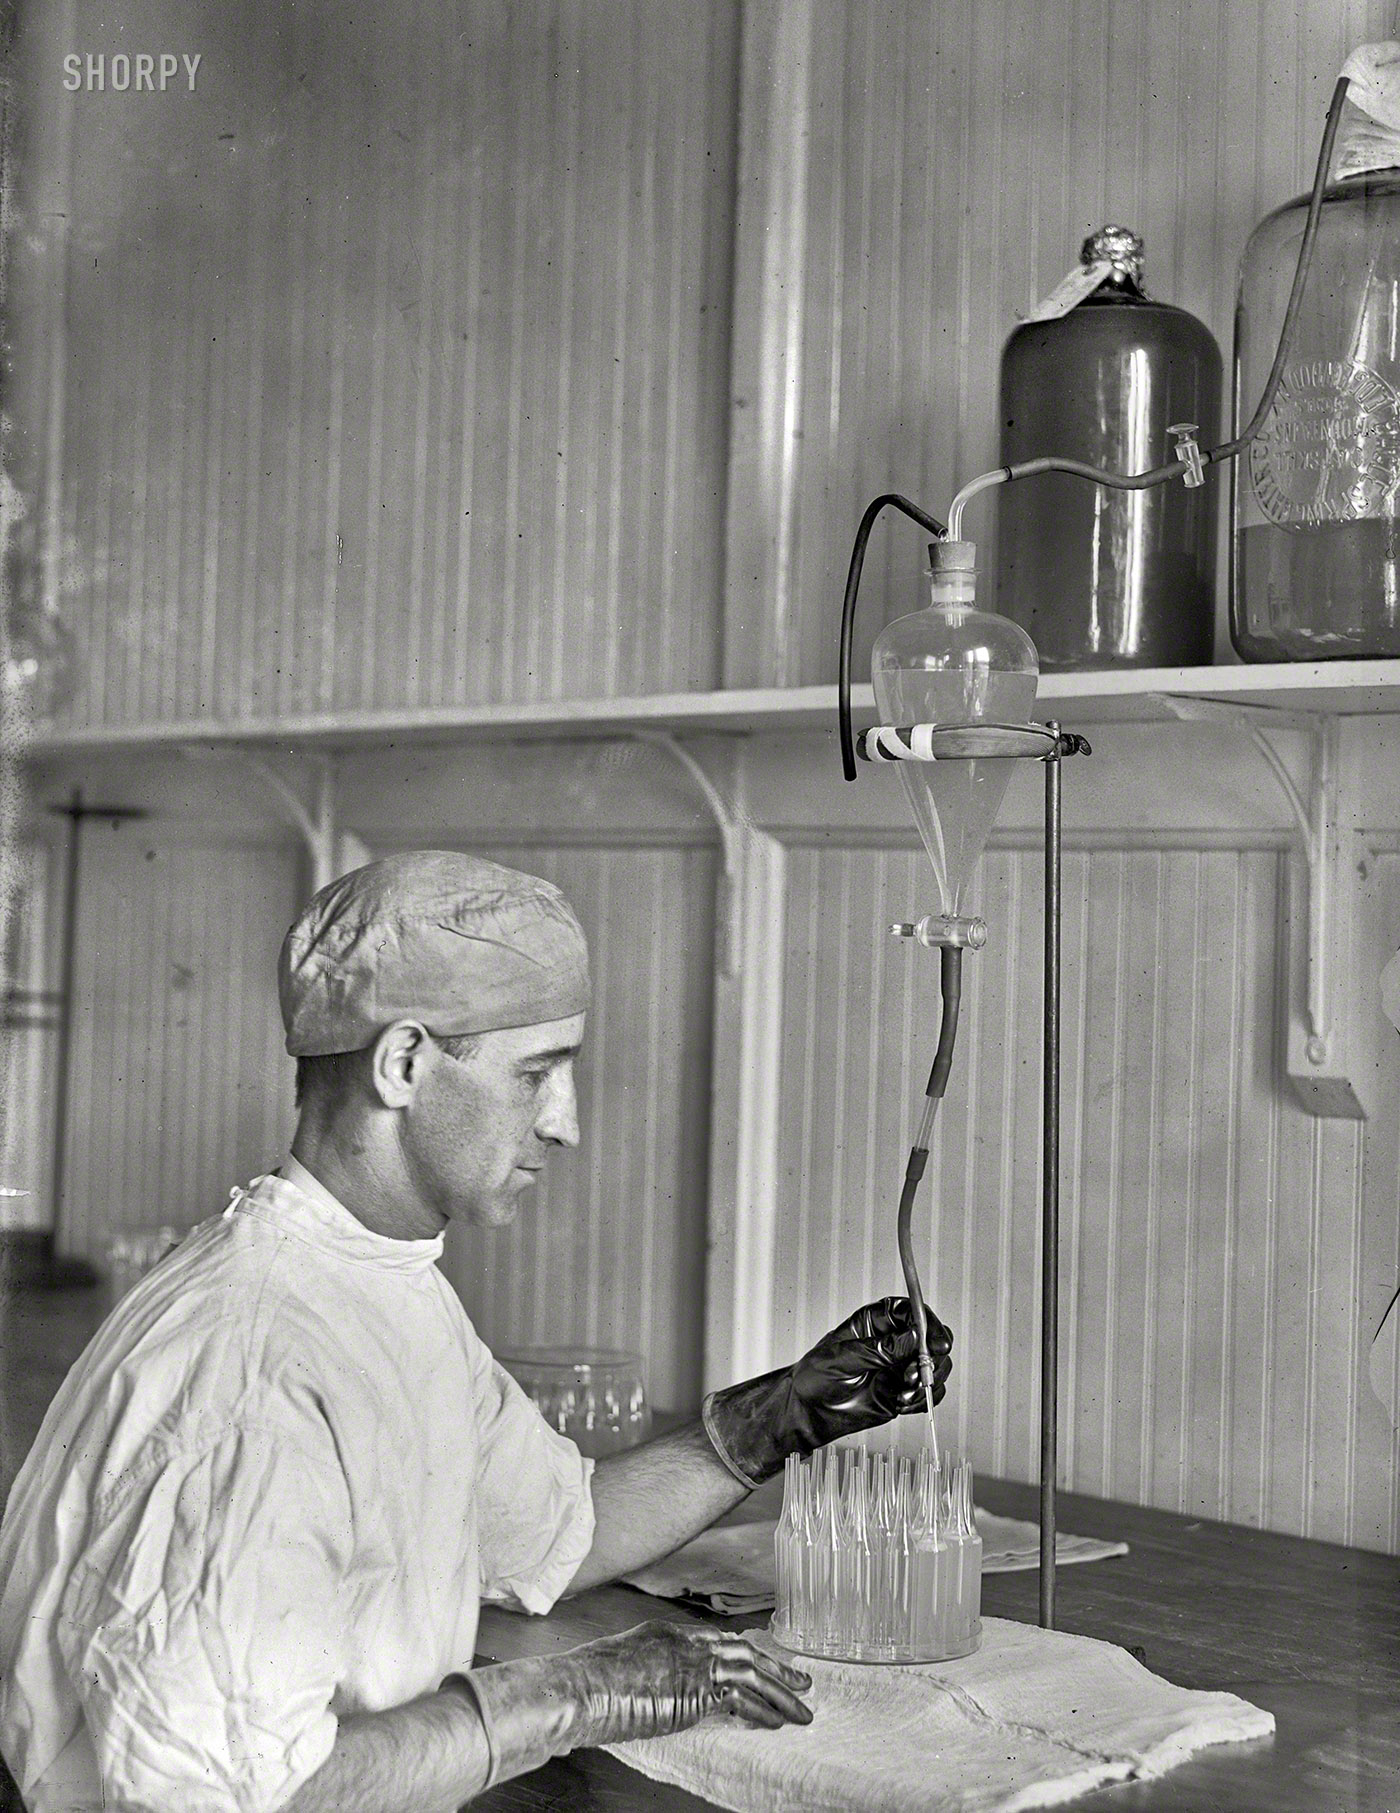 Washington, D.C., 1917. "U.S. Army medical school -- typhoid vaccine." Science marches on. Harris & Ewing Collection glass negative. View full size.